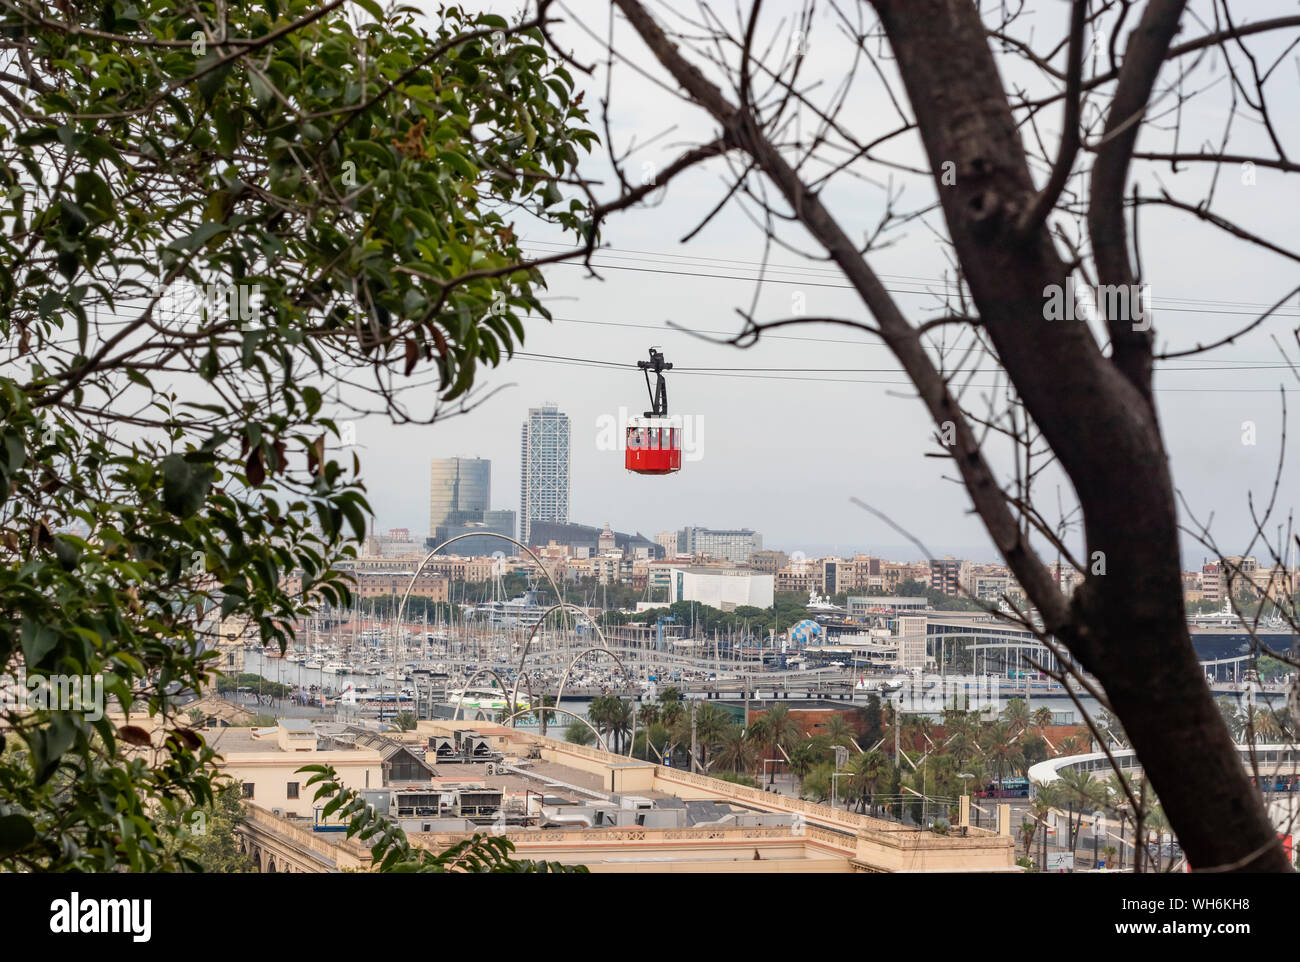 Iconic Barcelona's red aerial cableway moving over Port Vell. The red Funicular. Stock Photo